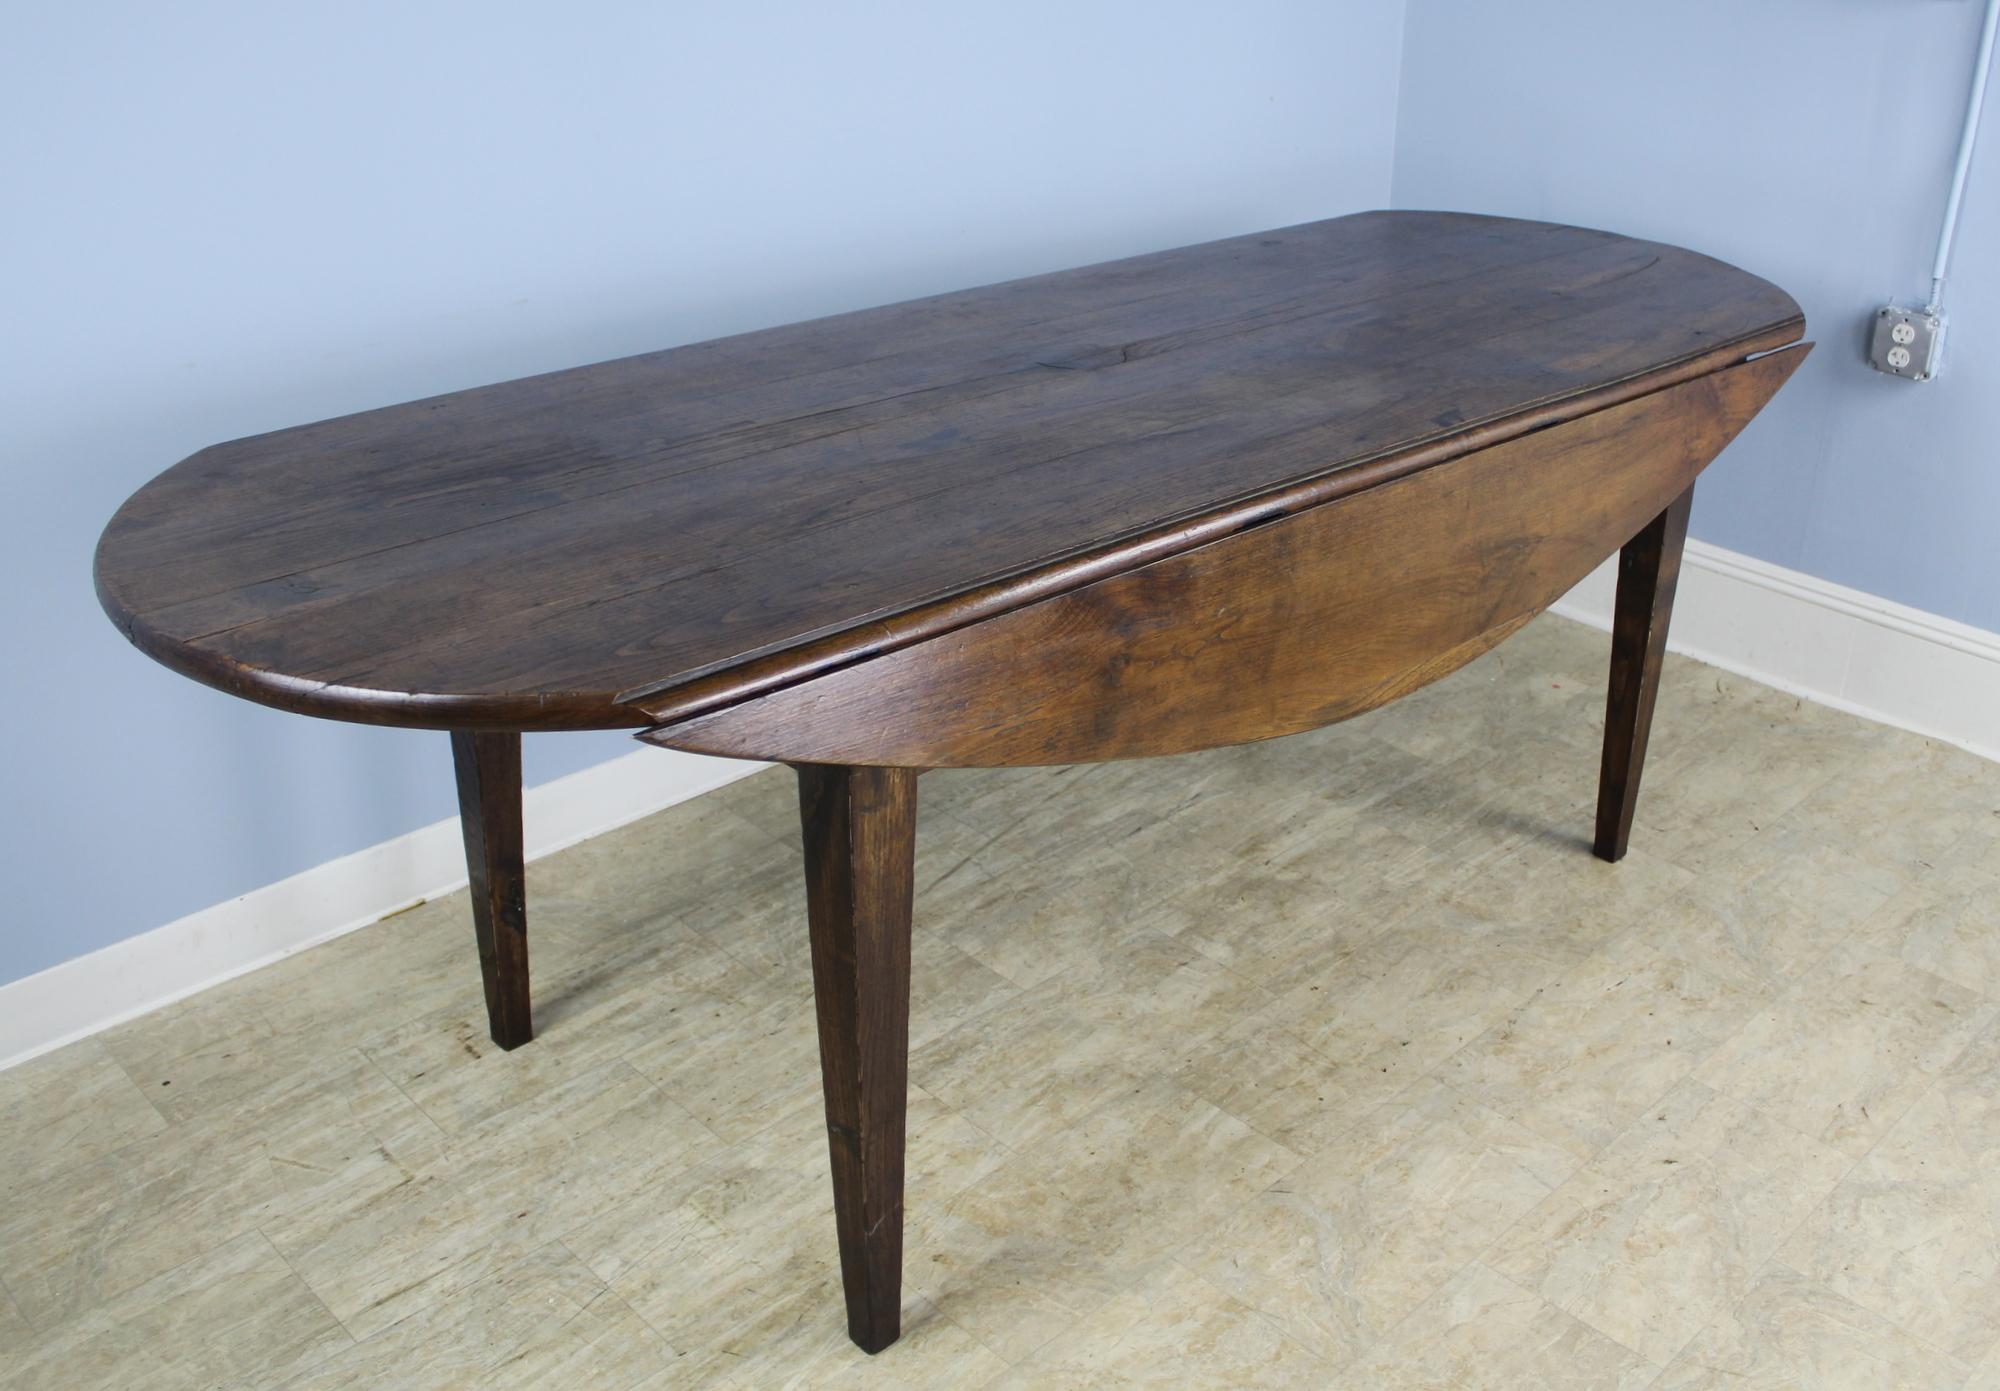 This splendid long chestnut table is full of country antique details. From the uniquely handcut thick top, to the original pullout / pull-out iron supports under the drop leaves, this table is like no other we have ever had in our store. Excellent